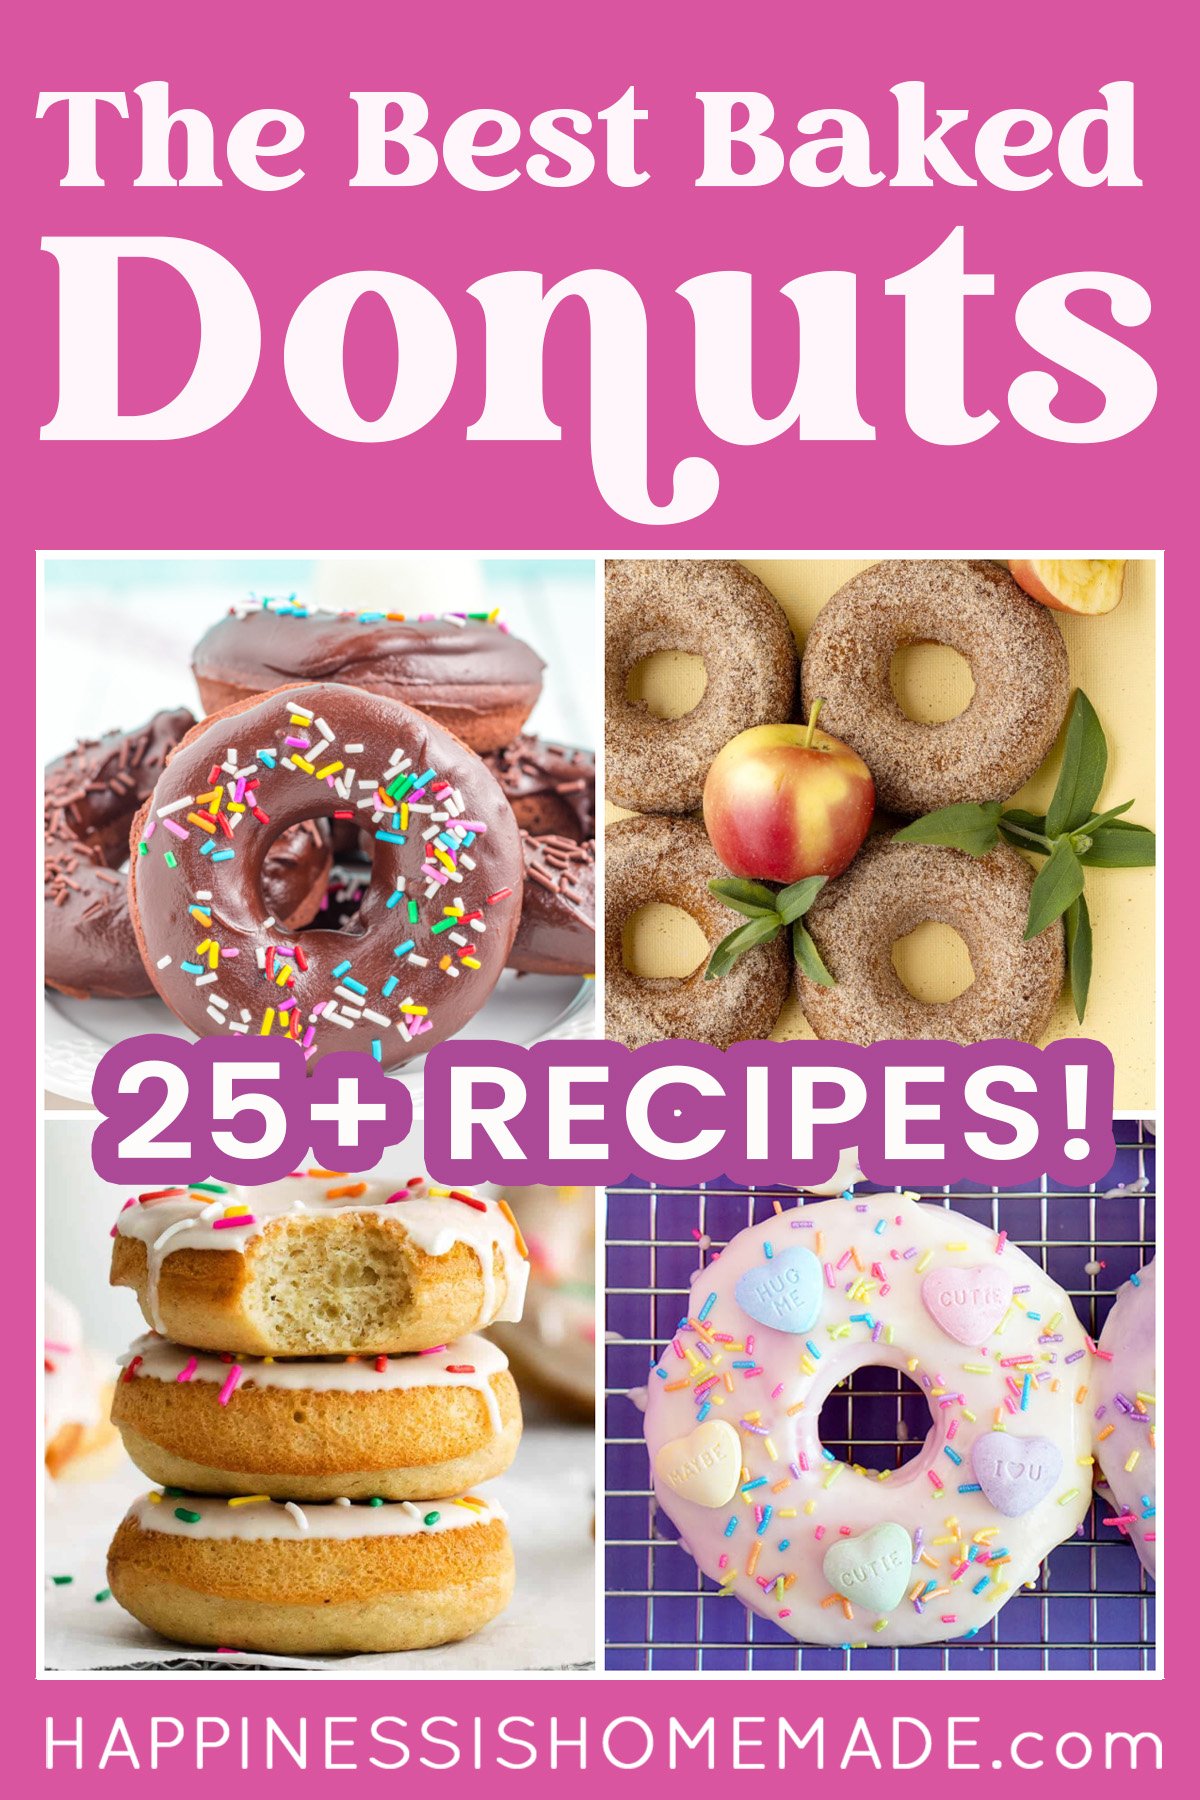 Graphic with text "The Best Baked Donuts: 25 Recipes!" and collage of 4 different types of baked donuts